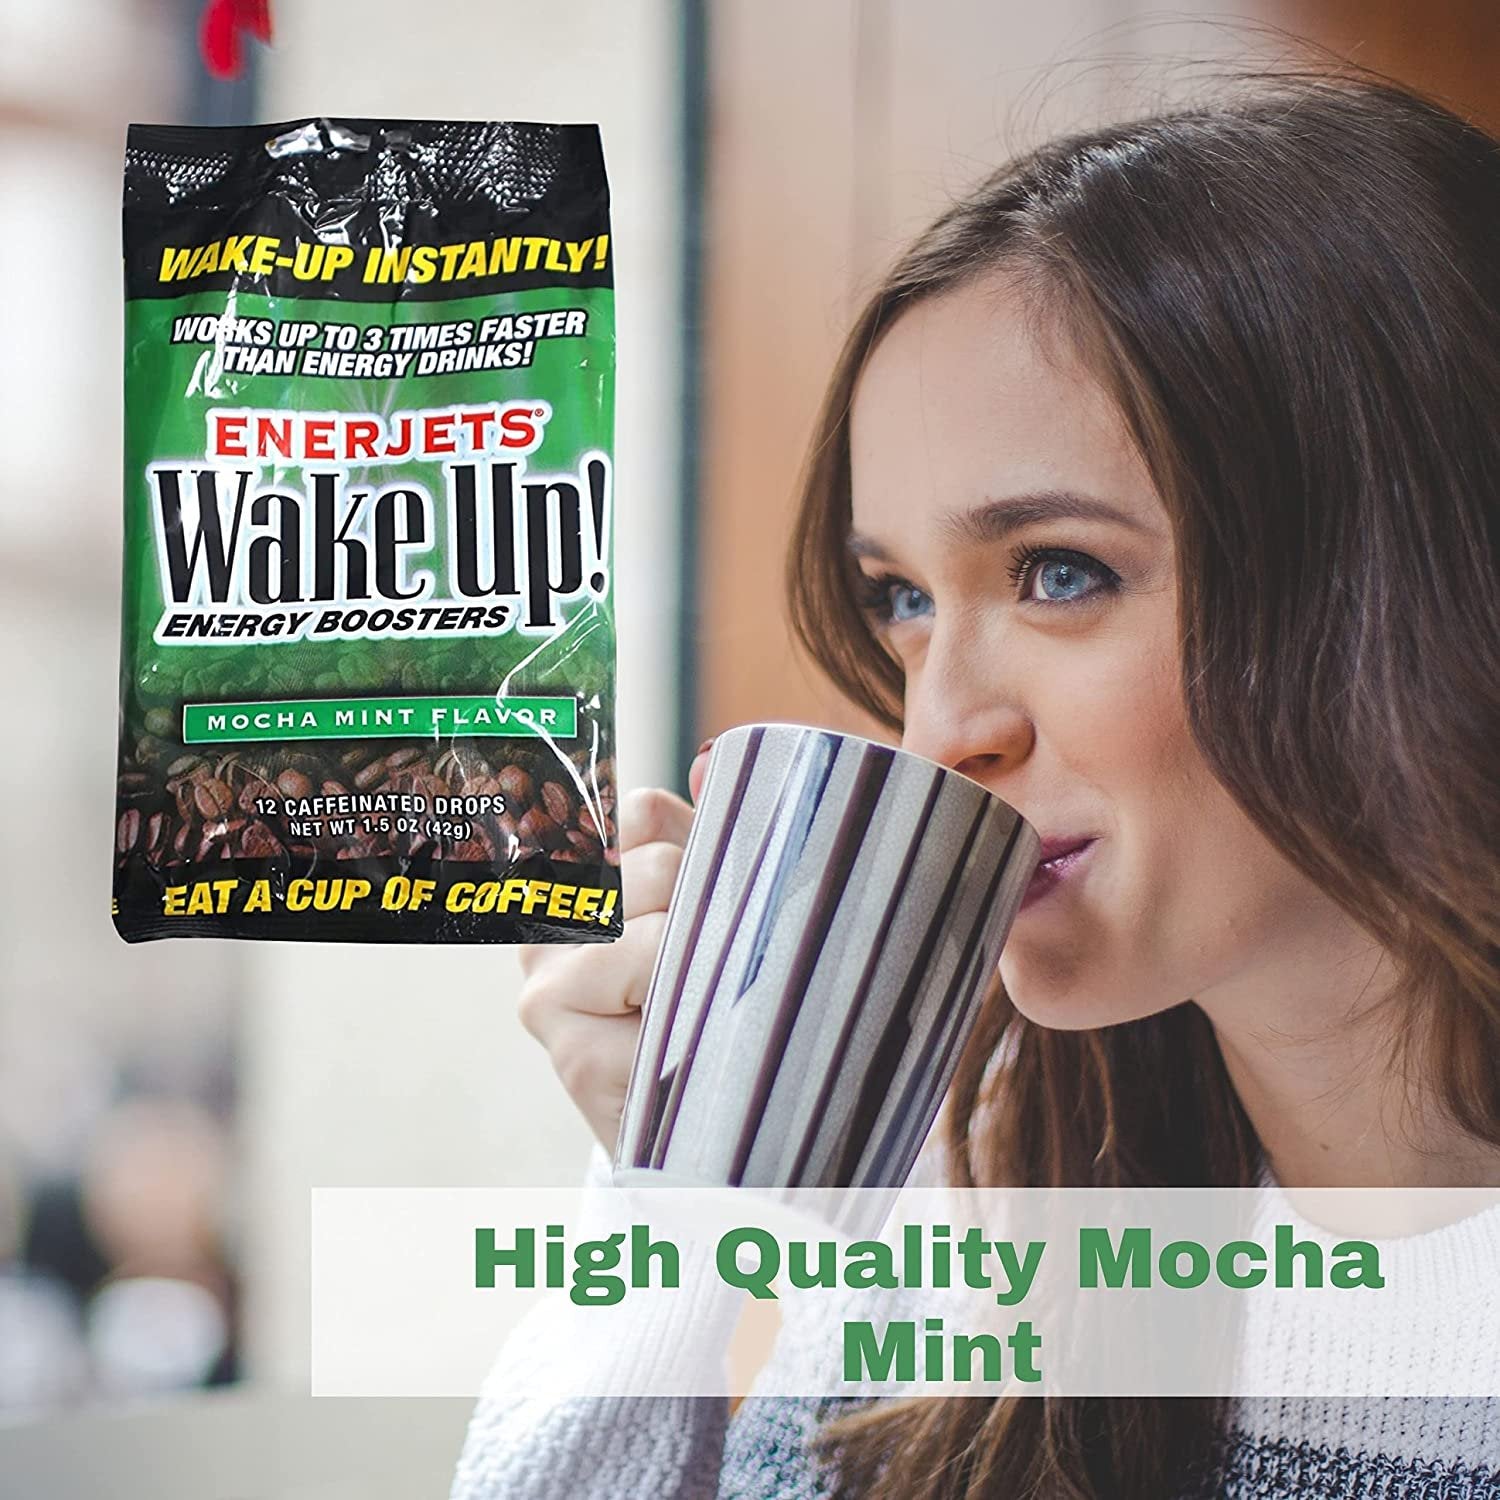 Worldwide Nutrition Enerjets Wake Up Energy Booster Caffeinated Drops - Instant Coffee Energy Supplements - Mocha Mint Flavor - Pack of 3, 12 Drops Per Package with Worldwide Multi Purpose Key Chain